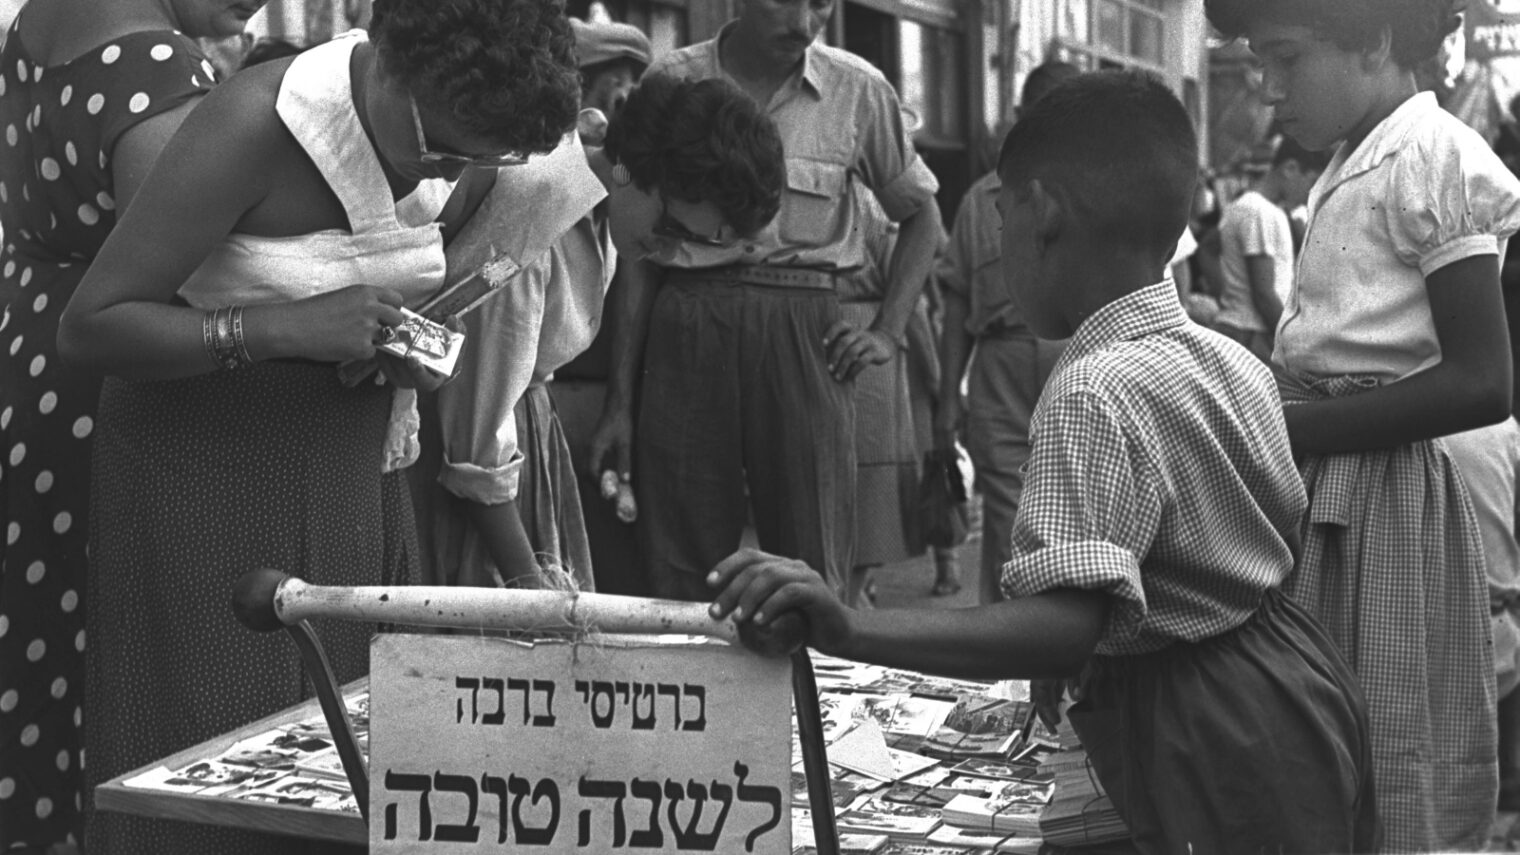 Israelis crowd around a temporary sidewalk tabletop stand in 1955 to purchase greeting cards for the Jewish New Year. Photo courtesy of the Government Press Office